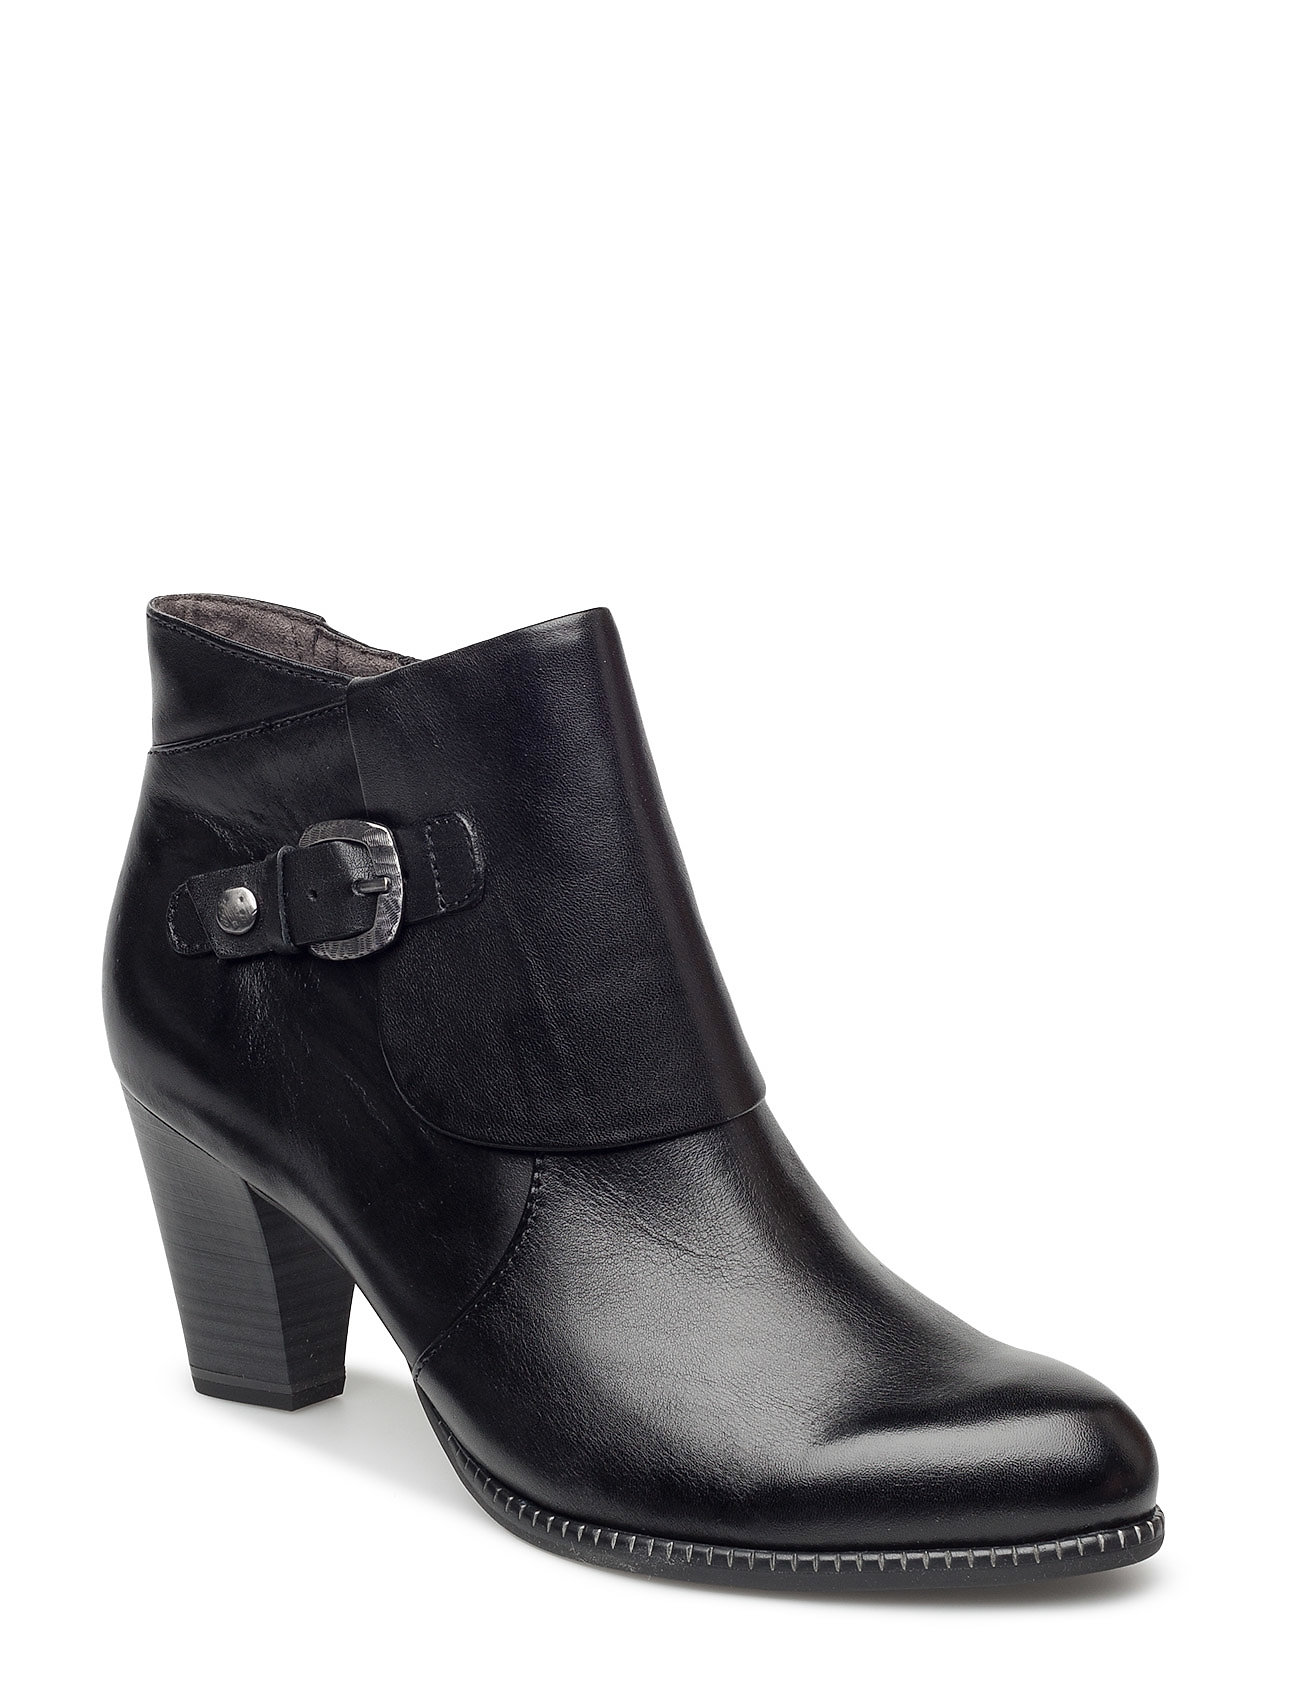 Woms Boots - Eddy Shoes Boots Ankle Boots Ankle Boot - Heel Musta Tamaris Heart & Sole